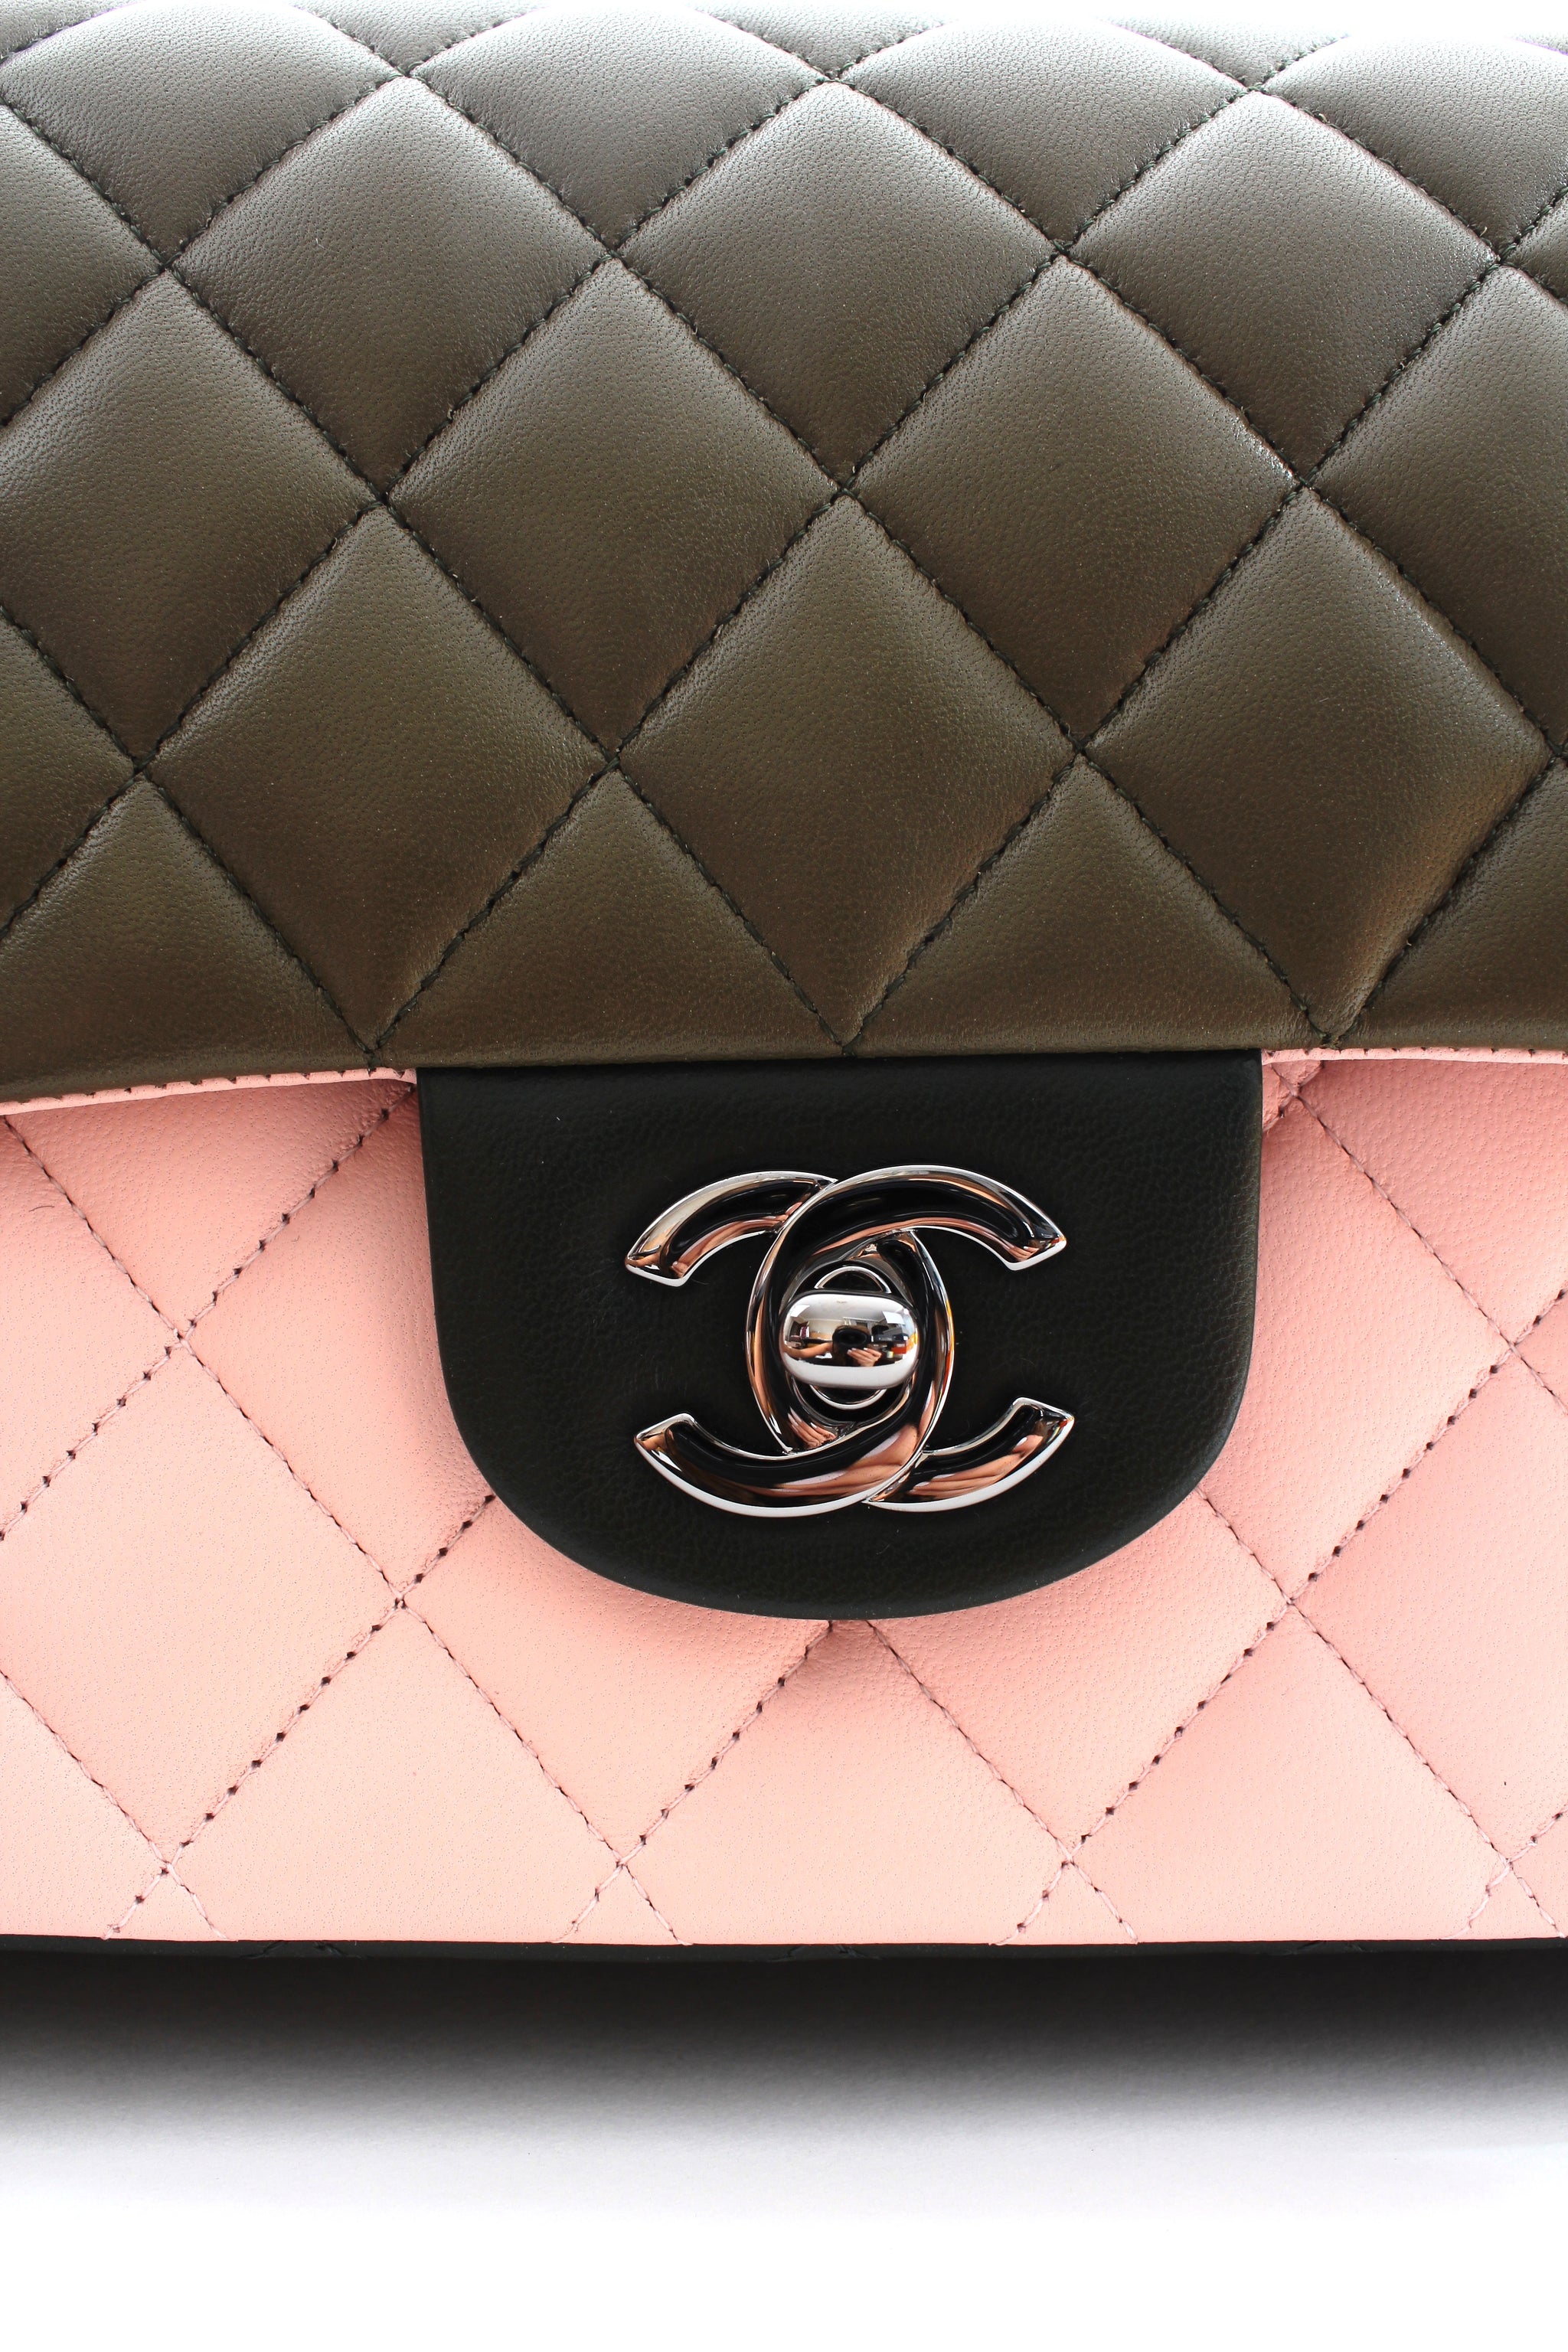 Chanel Tri-Colour Quilted Leather Medium Flap Bag - Limited